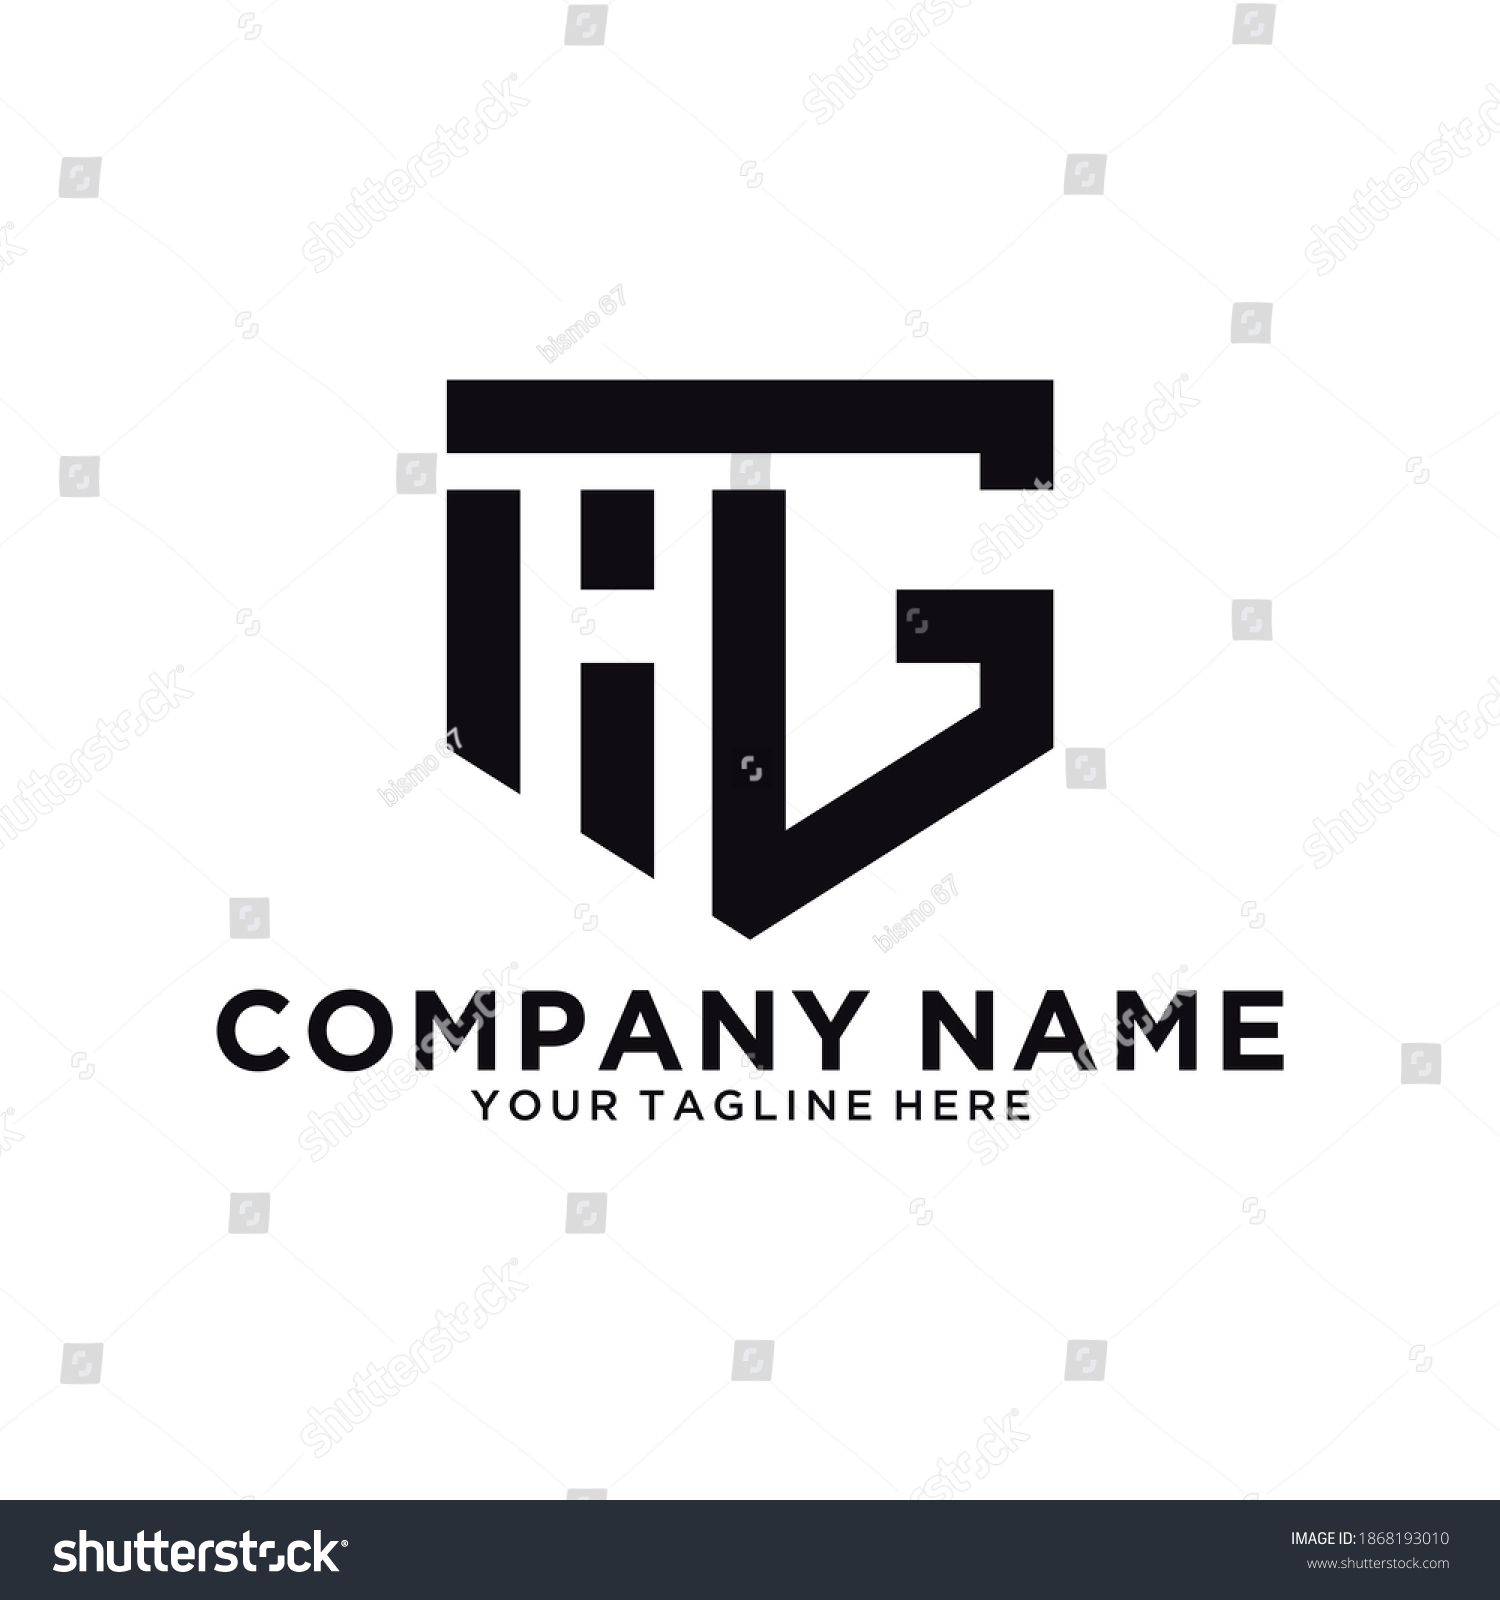 19 Letter atg logo vector template Images, Stock Photos & Vectors ...